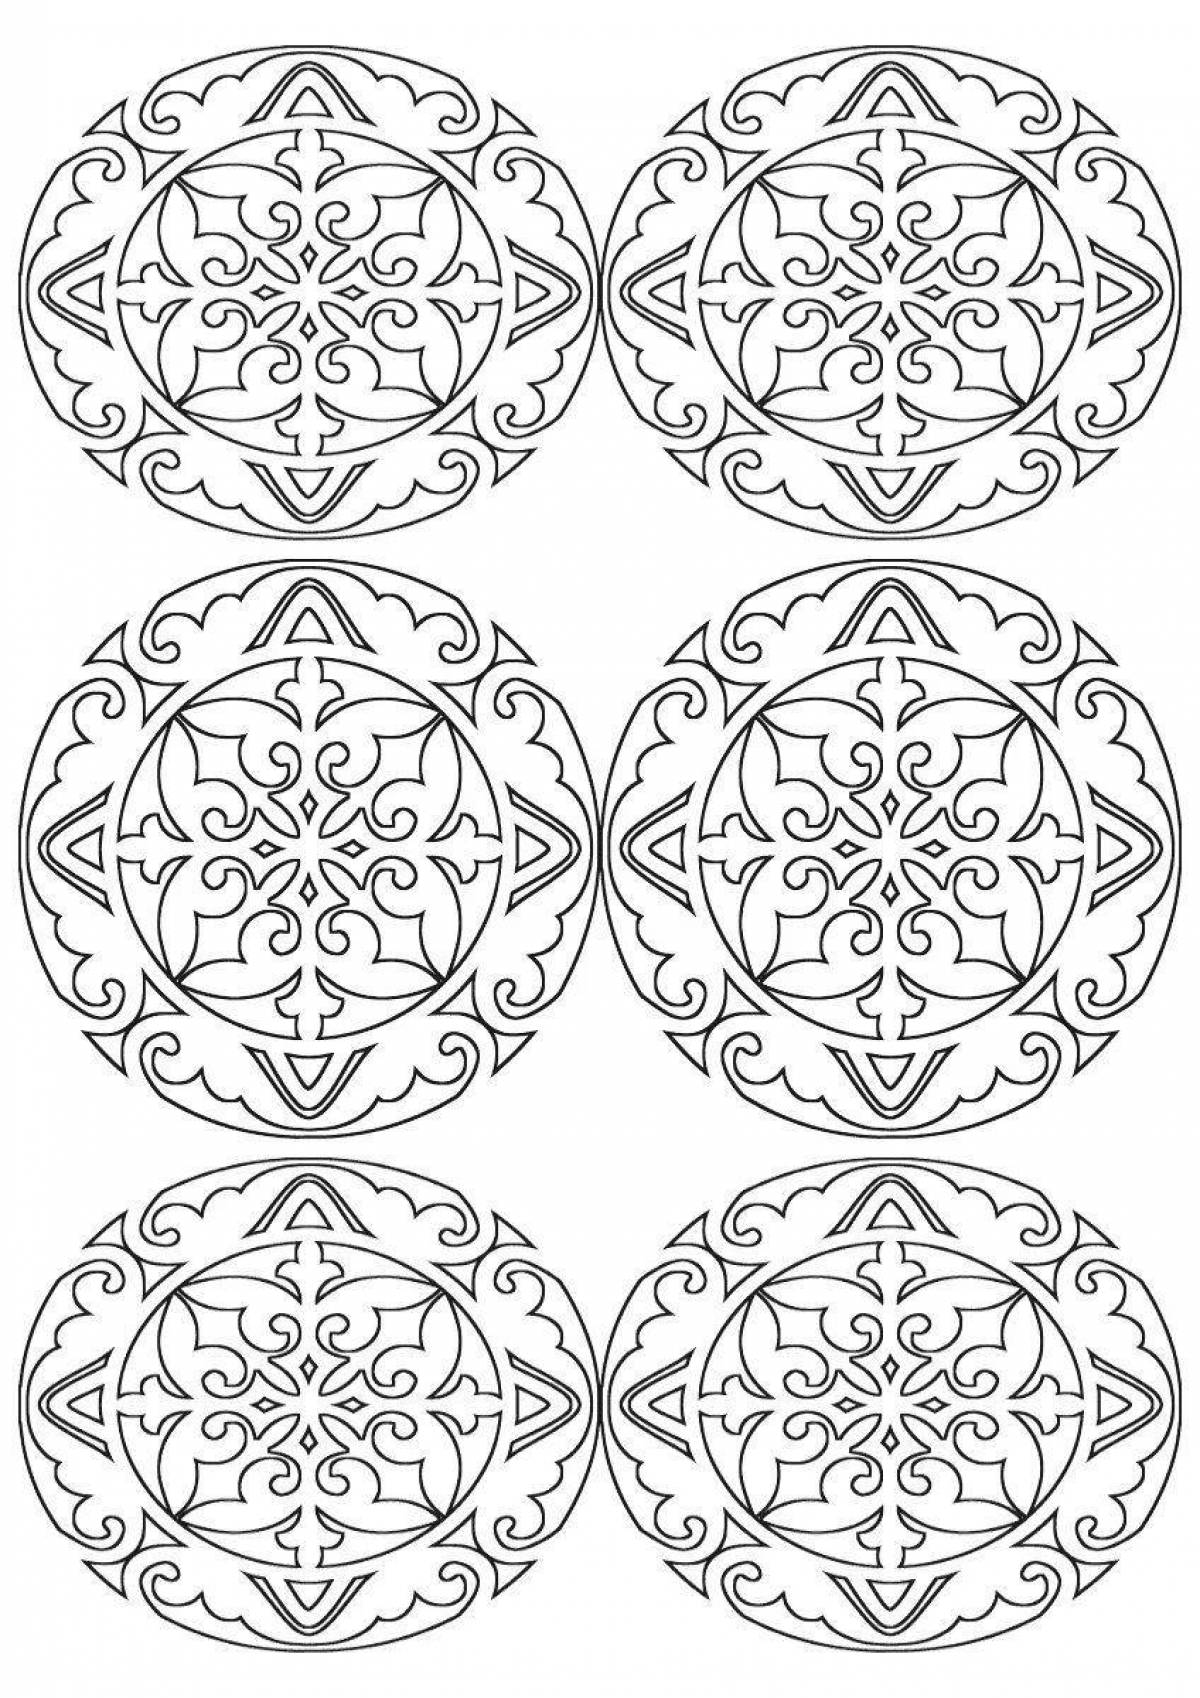 Coloring page gentle belarusian ornament